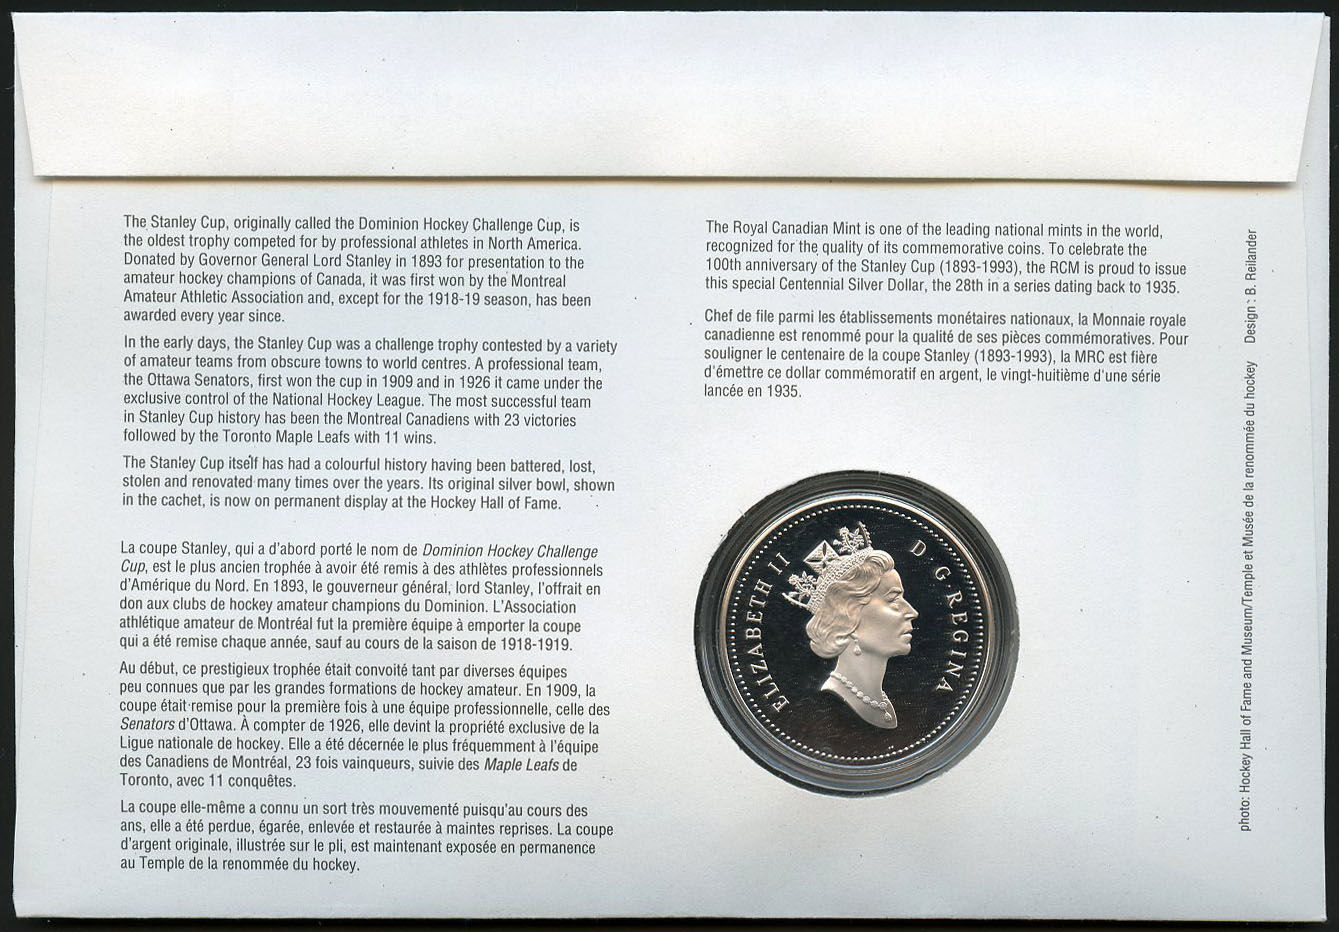 Buy Cover #PNC1 - Stanley Cup 43¢ with Proof Silver Dollar (1993)